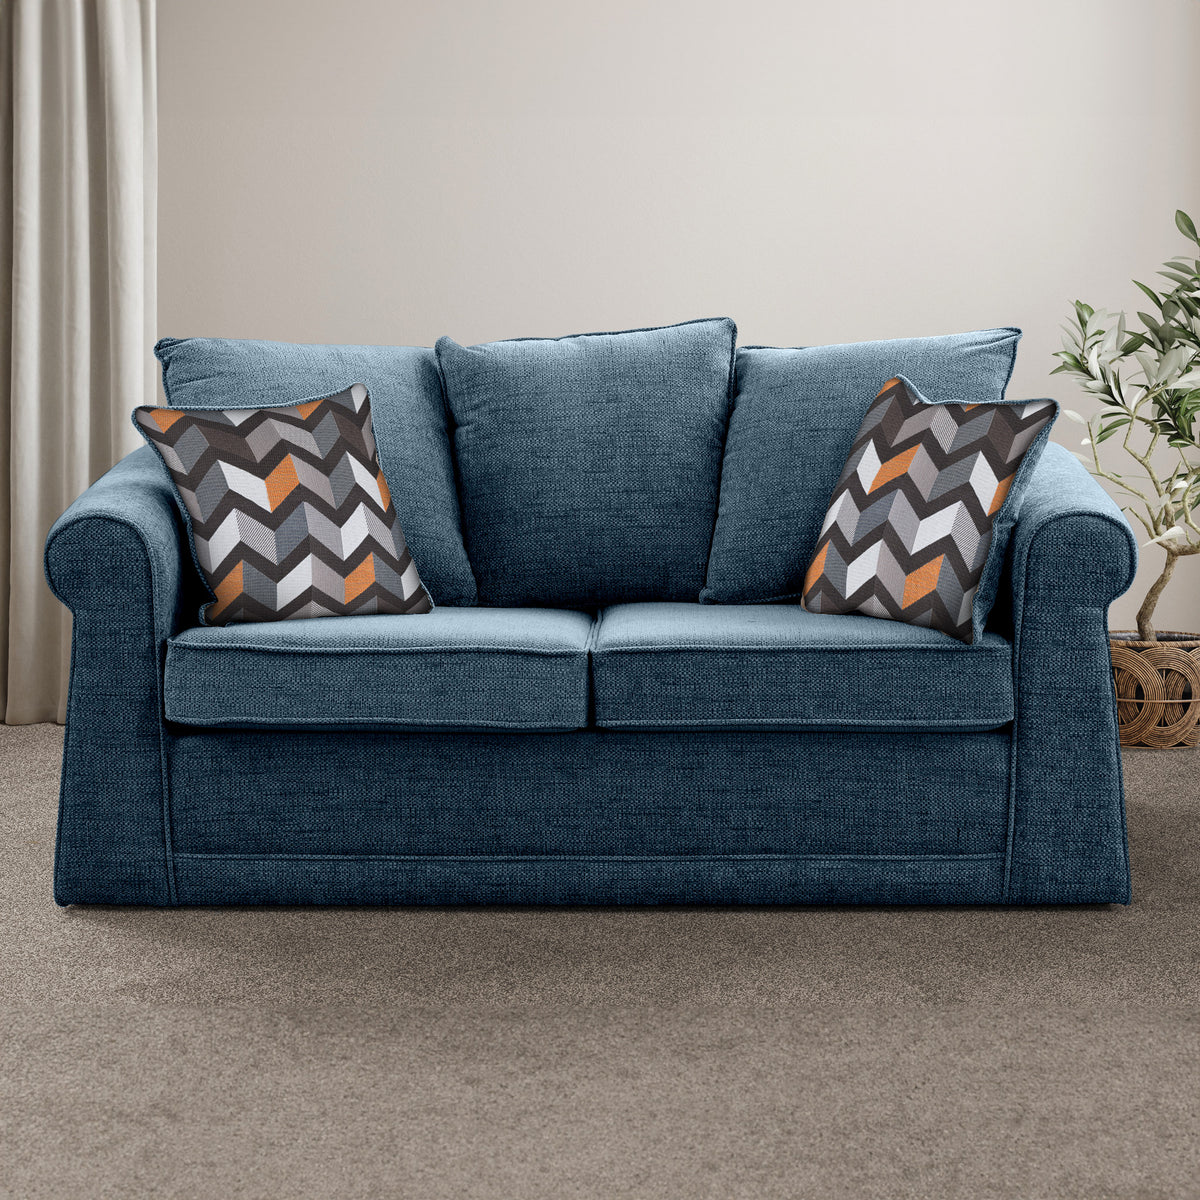 Branston Midnight Soft Weave 2 Seater Sofabed with Charcoal Scatter Cushions from Roseland Furniture